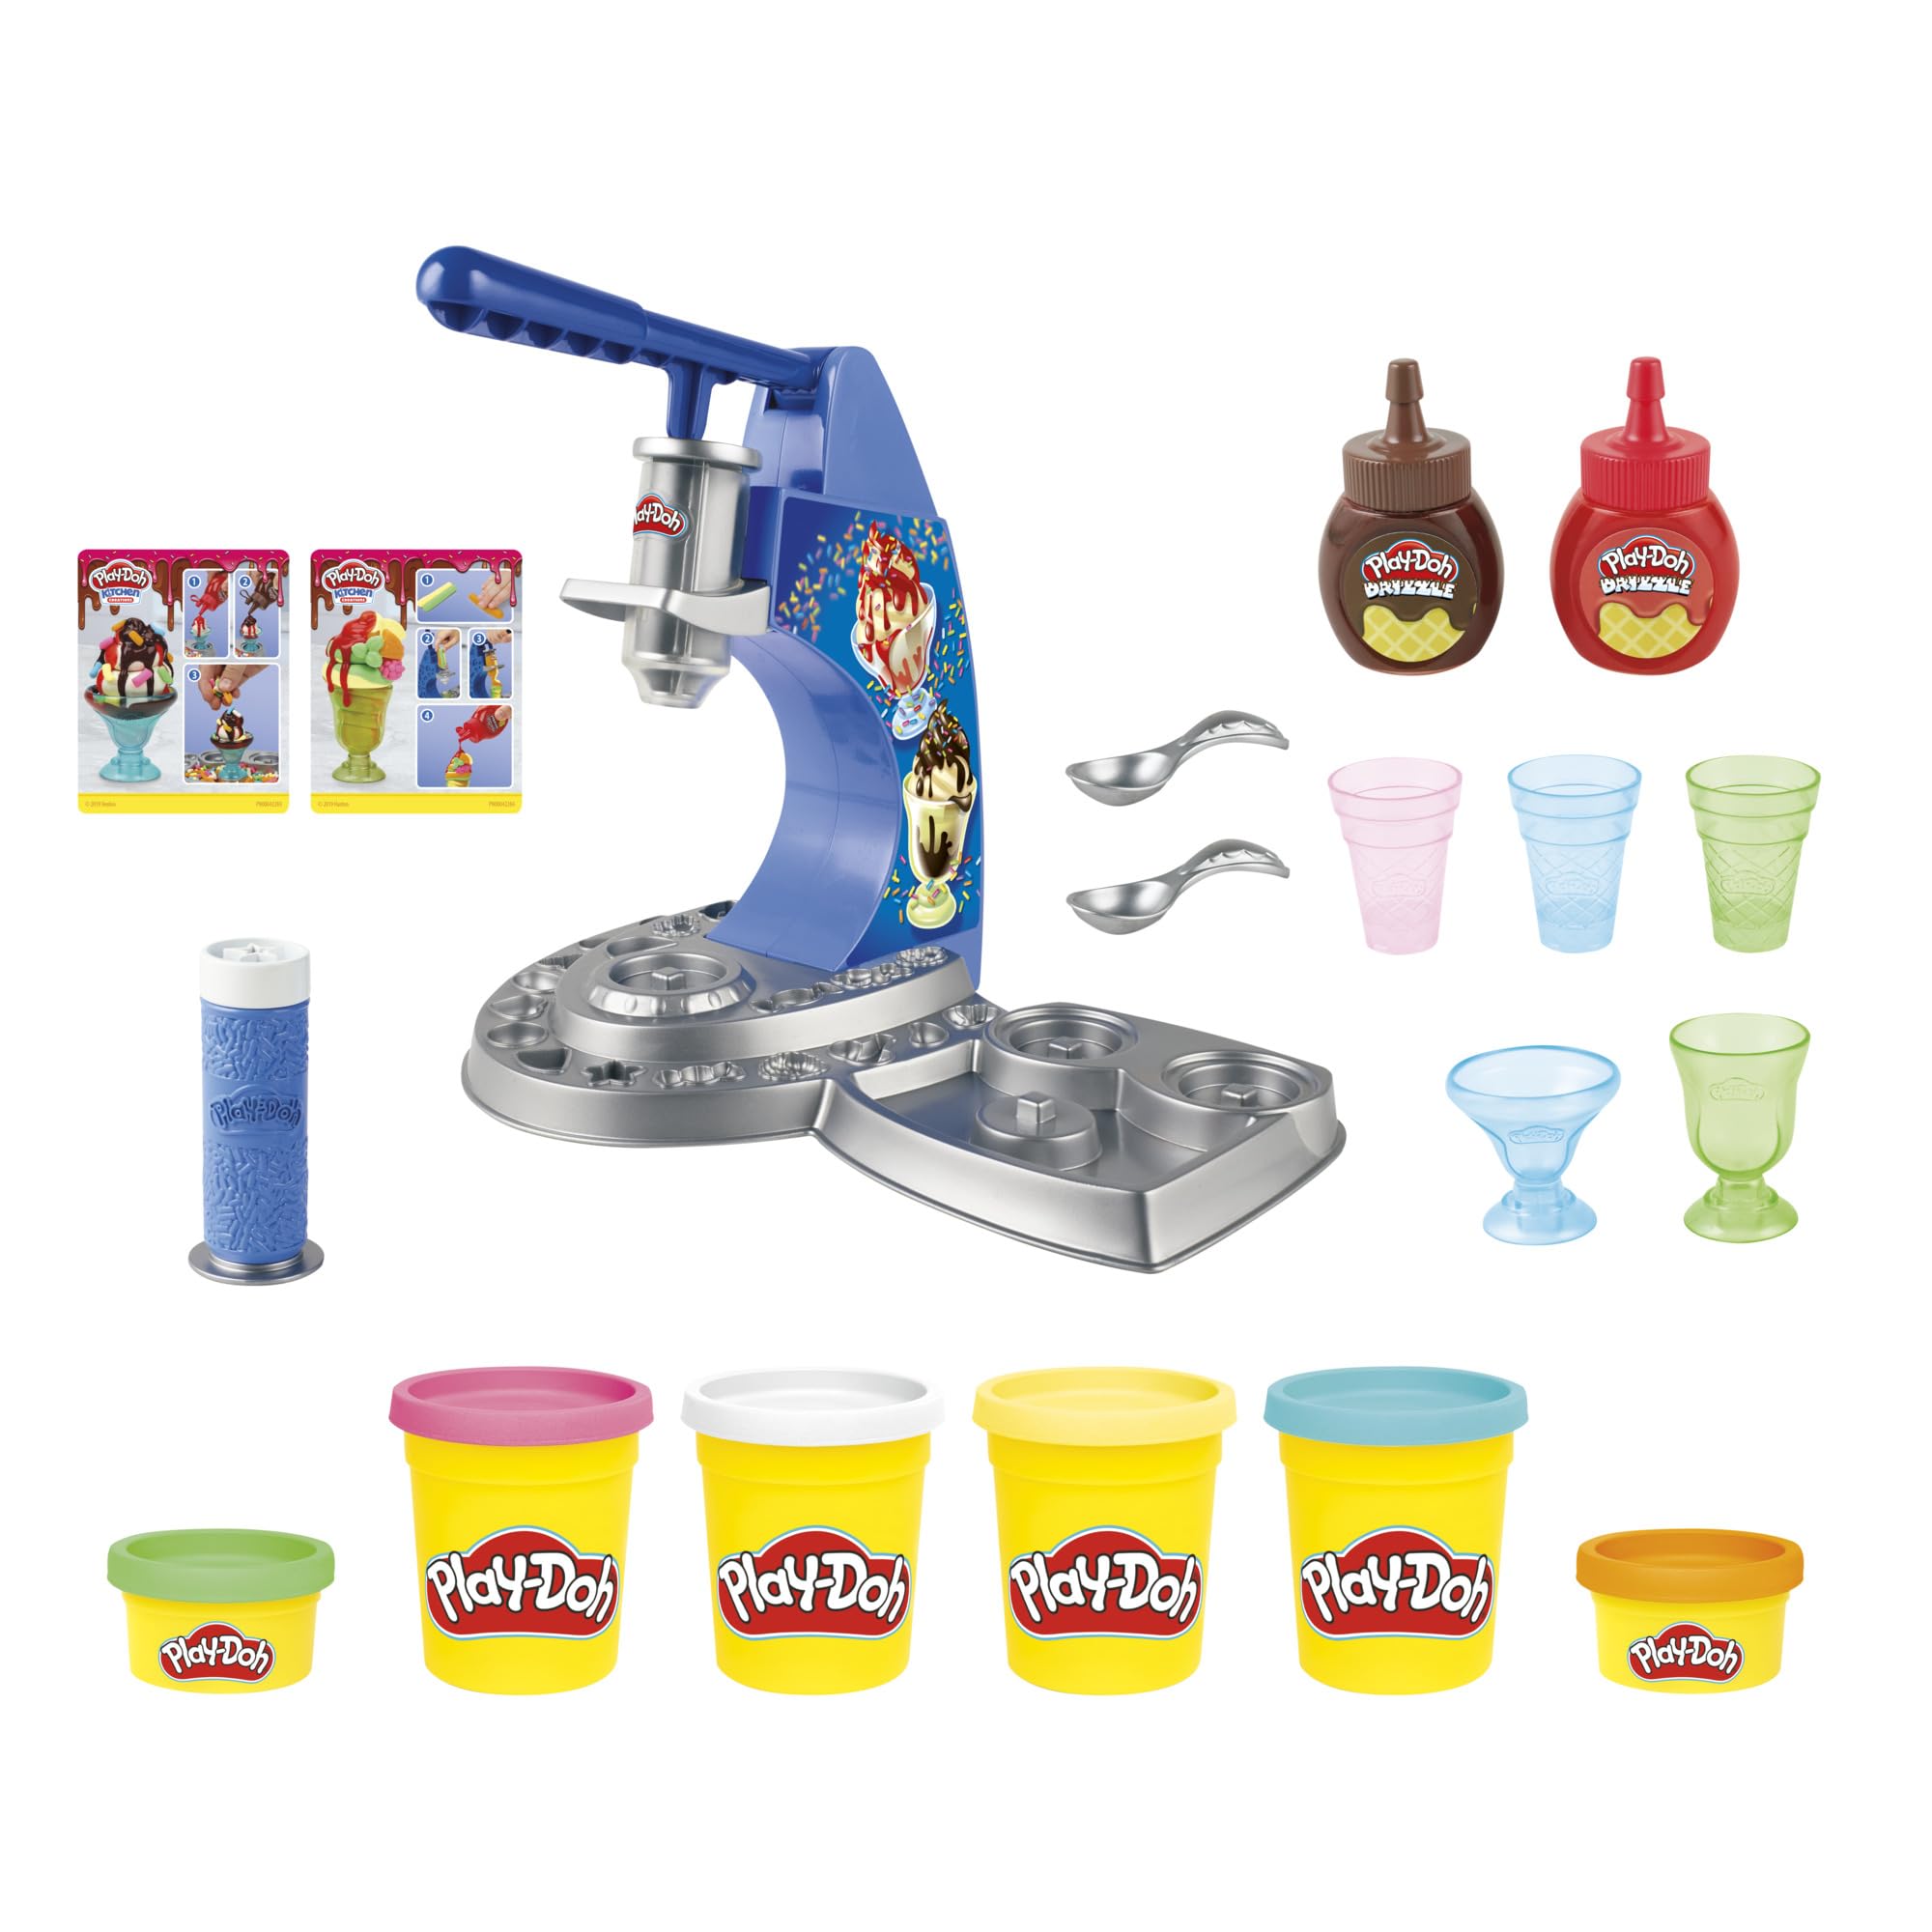 Play-Doh Drizzy Eismaschine mit Toppings, inklusive Drizzle Knete und 6 Farben